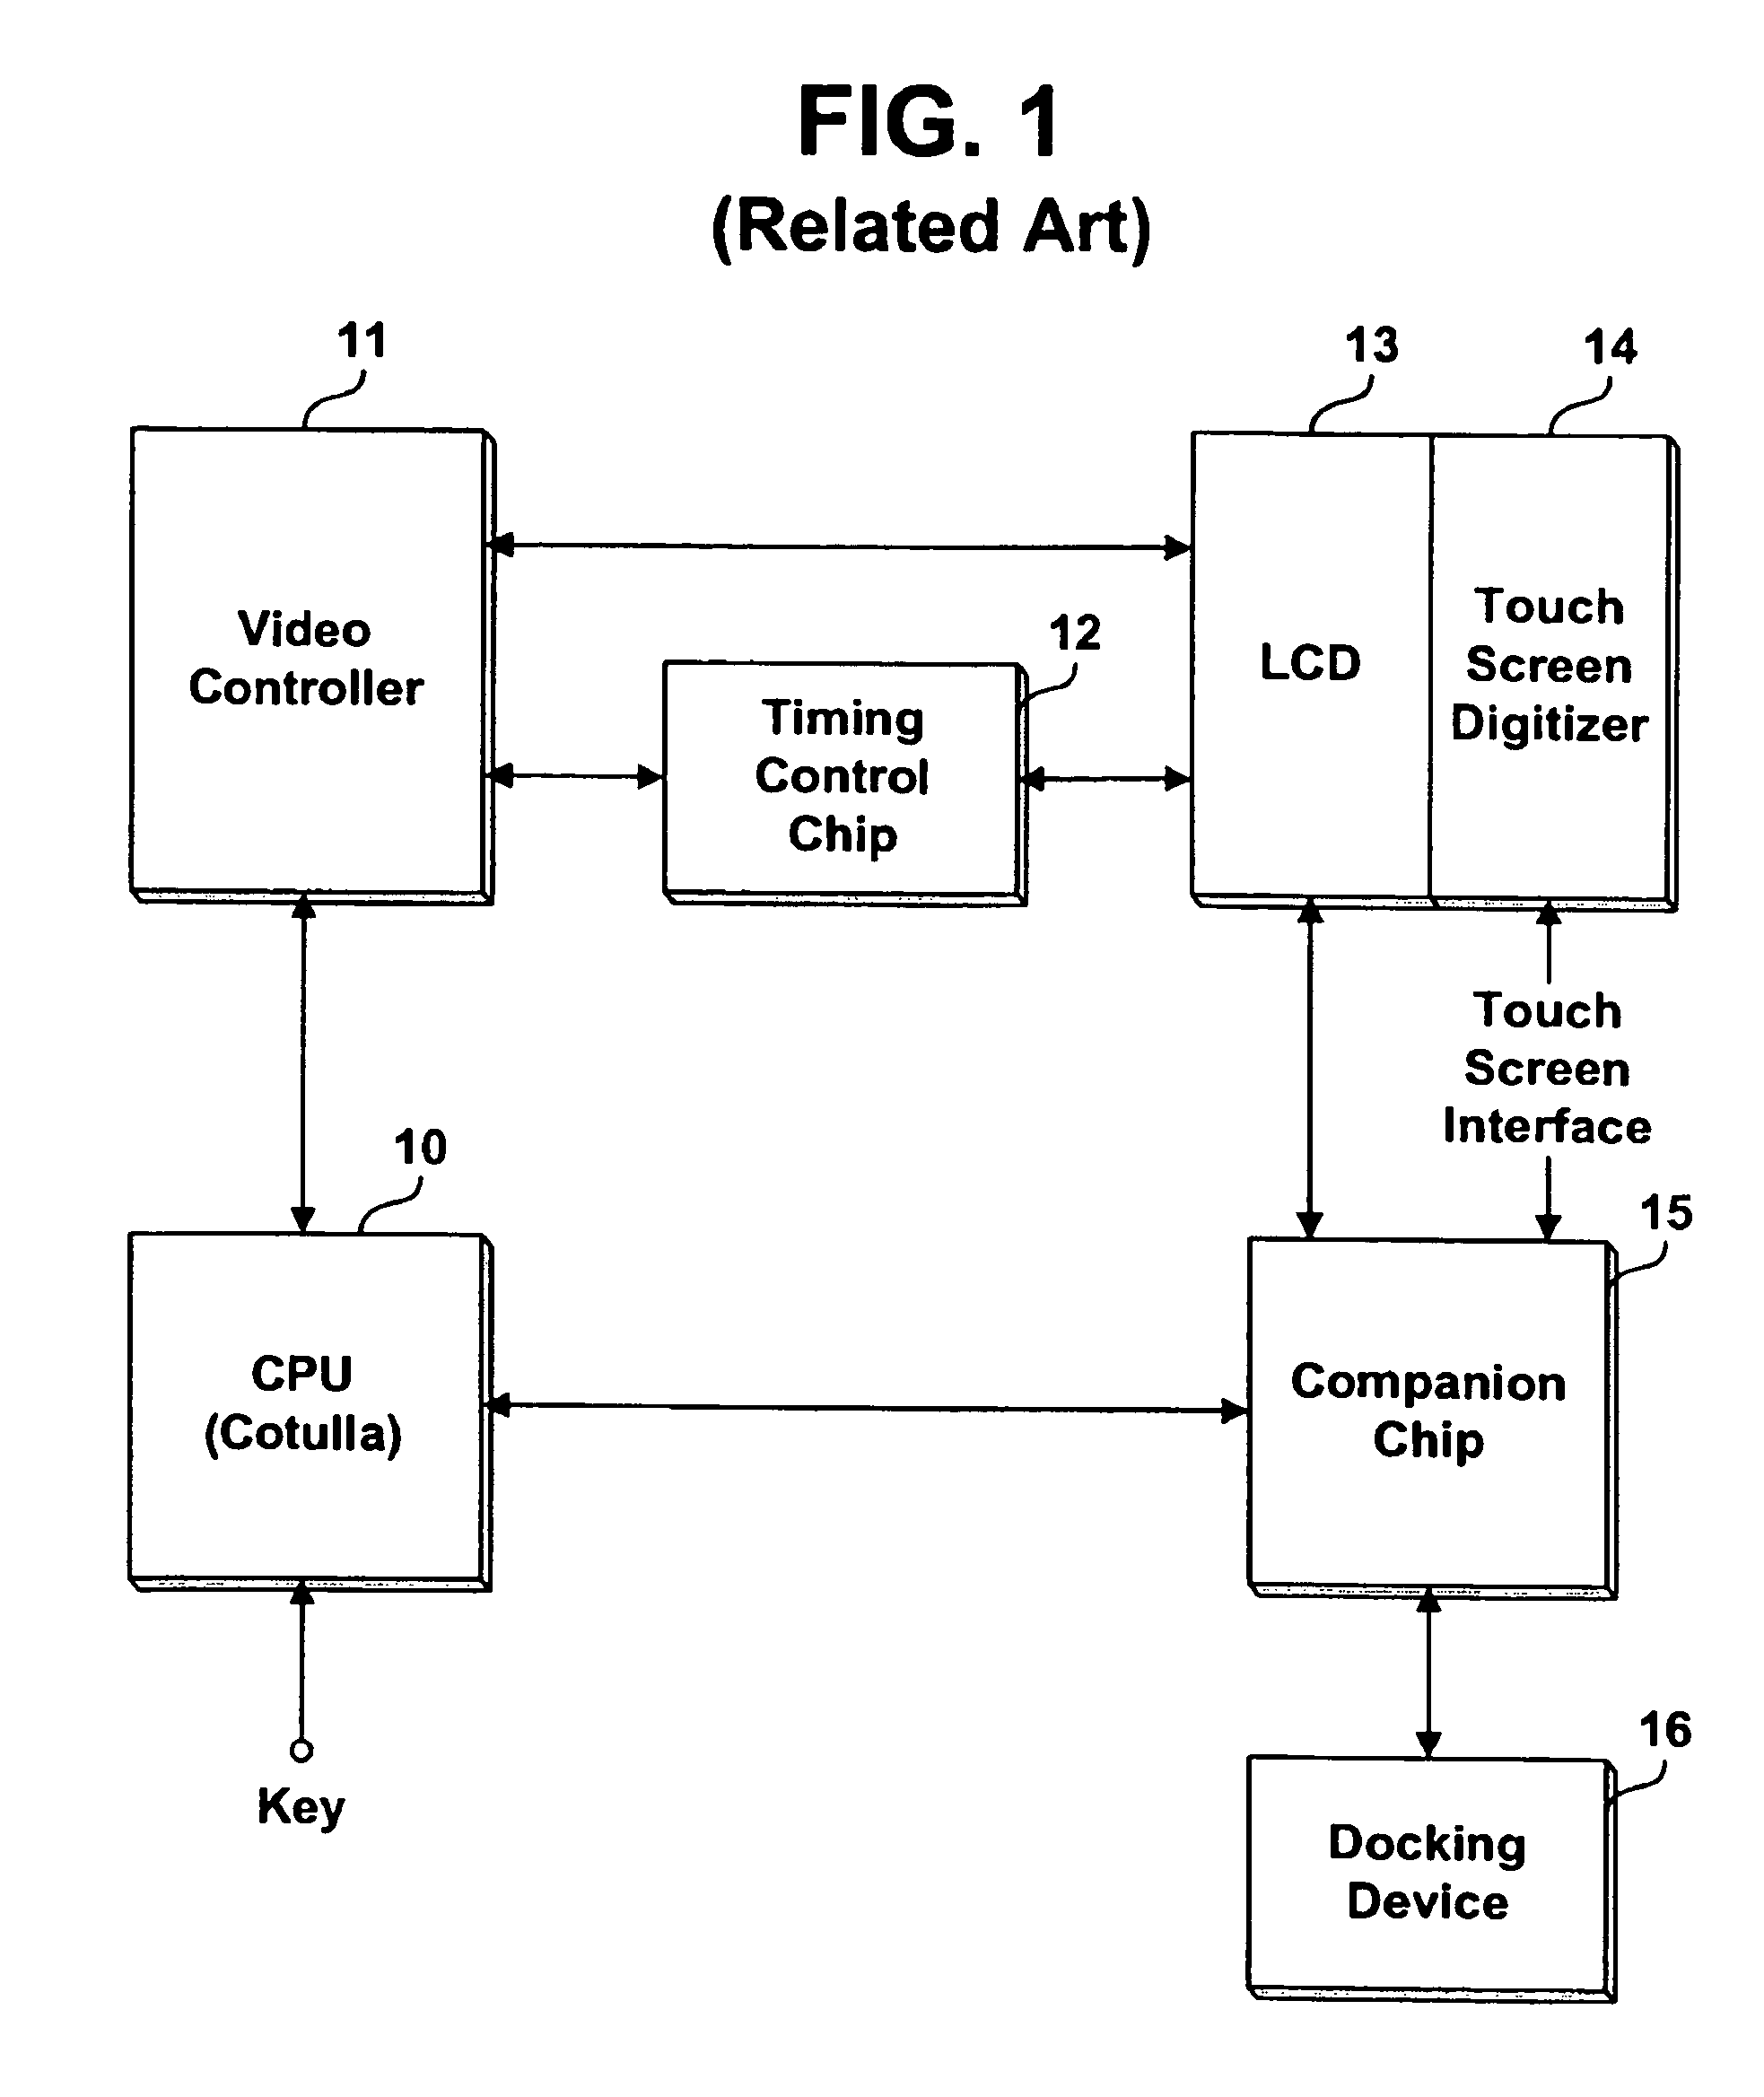 Method for controlling display mode in portable computer